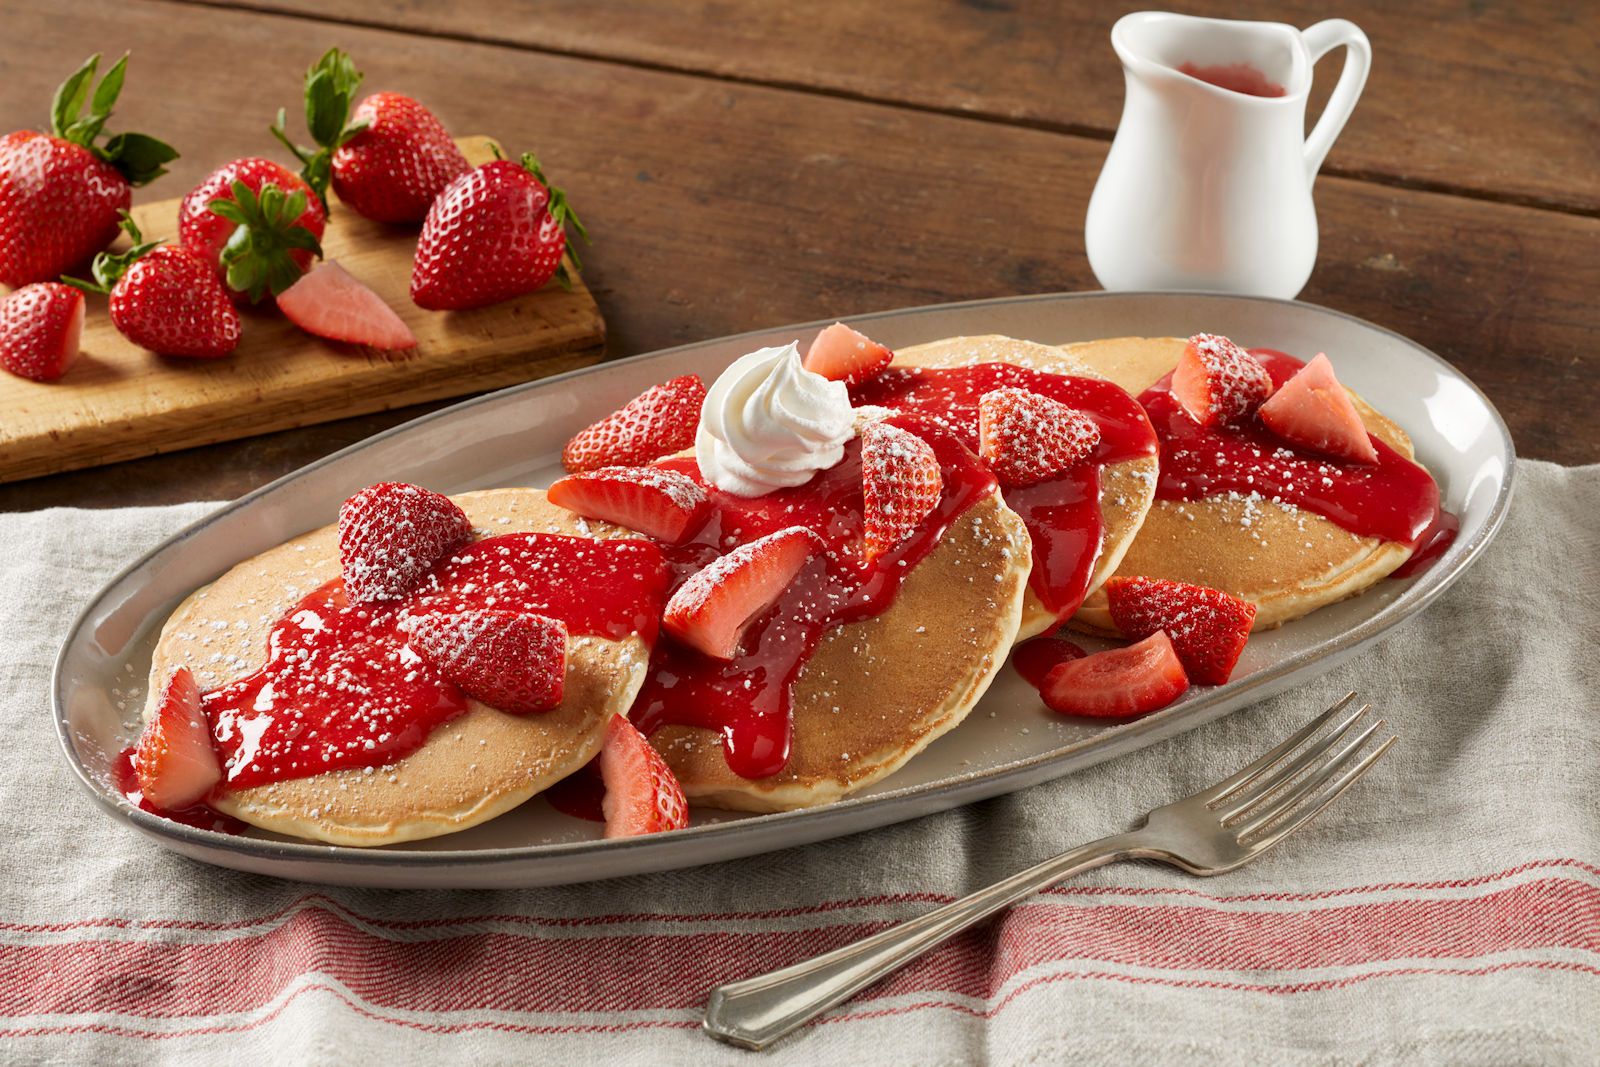 Bob Evans Restaurants Introduces New Farm-Fresh Berry Dishes for Spring